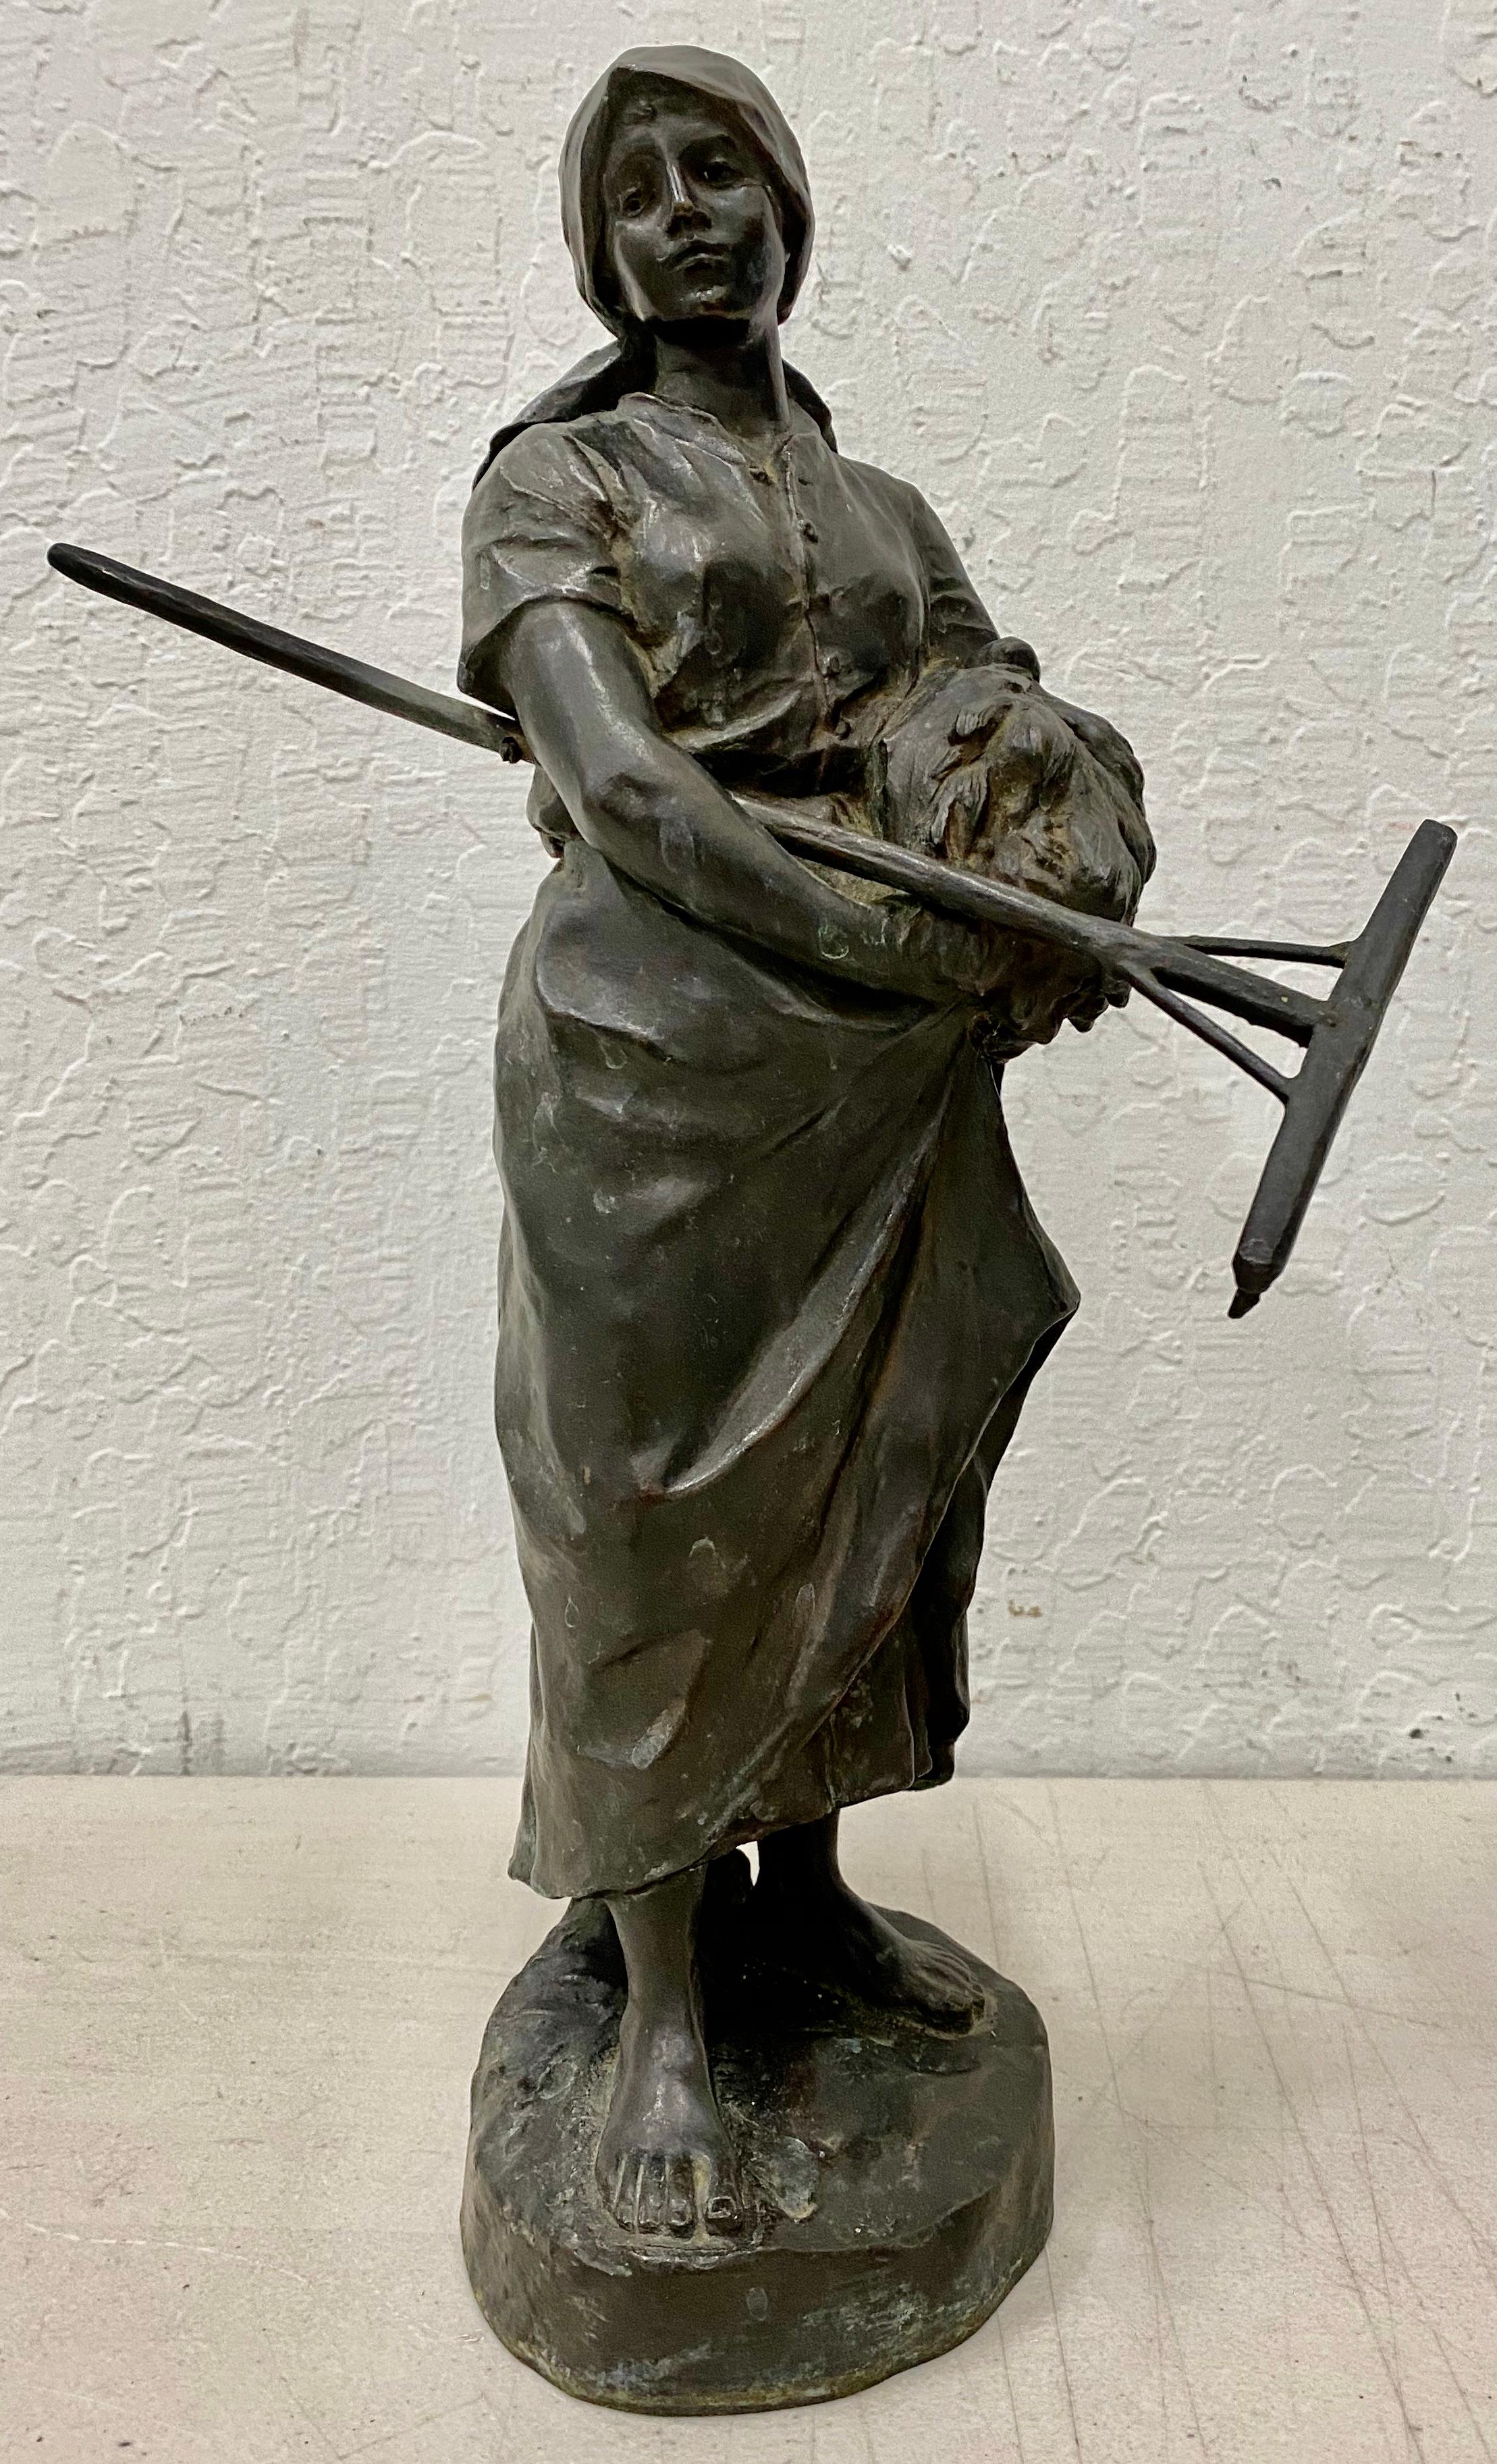 Hans Muller (Austria, 1873-1937) "Young Seamstress w/ Sickle & Rake" Original Bronze 19th c.

Dimensions 5" x 4" at the base x 15" high.

Signed at the base. Very good condition.

Hans Müller was born in 1873. He was a sculptor, and the son of